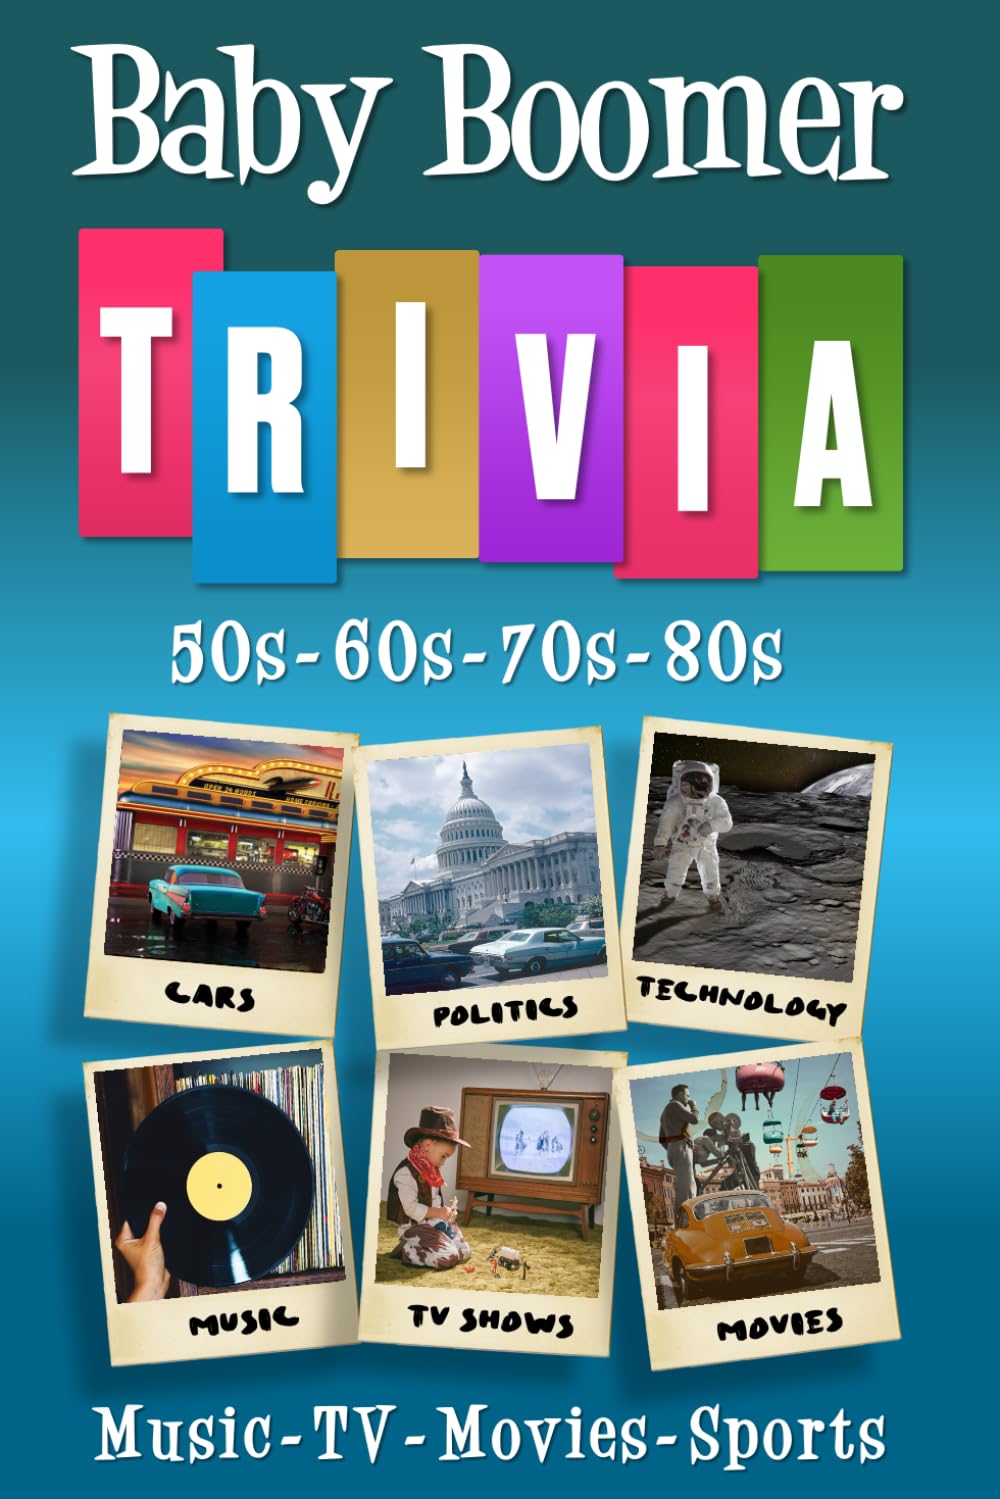 Baby Boomer Trivia: 1950s, 1960s, 1970s, 1980s - Music, TV, Movies, Sports, Cars and People